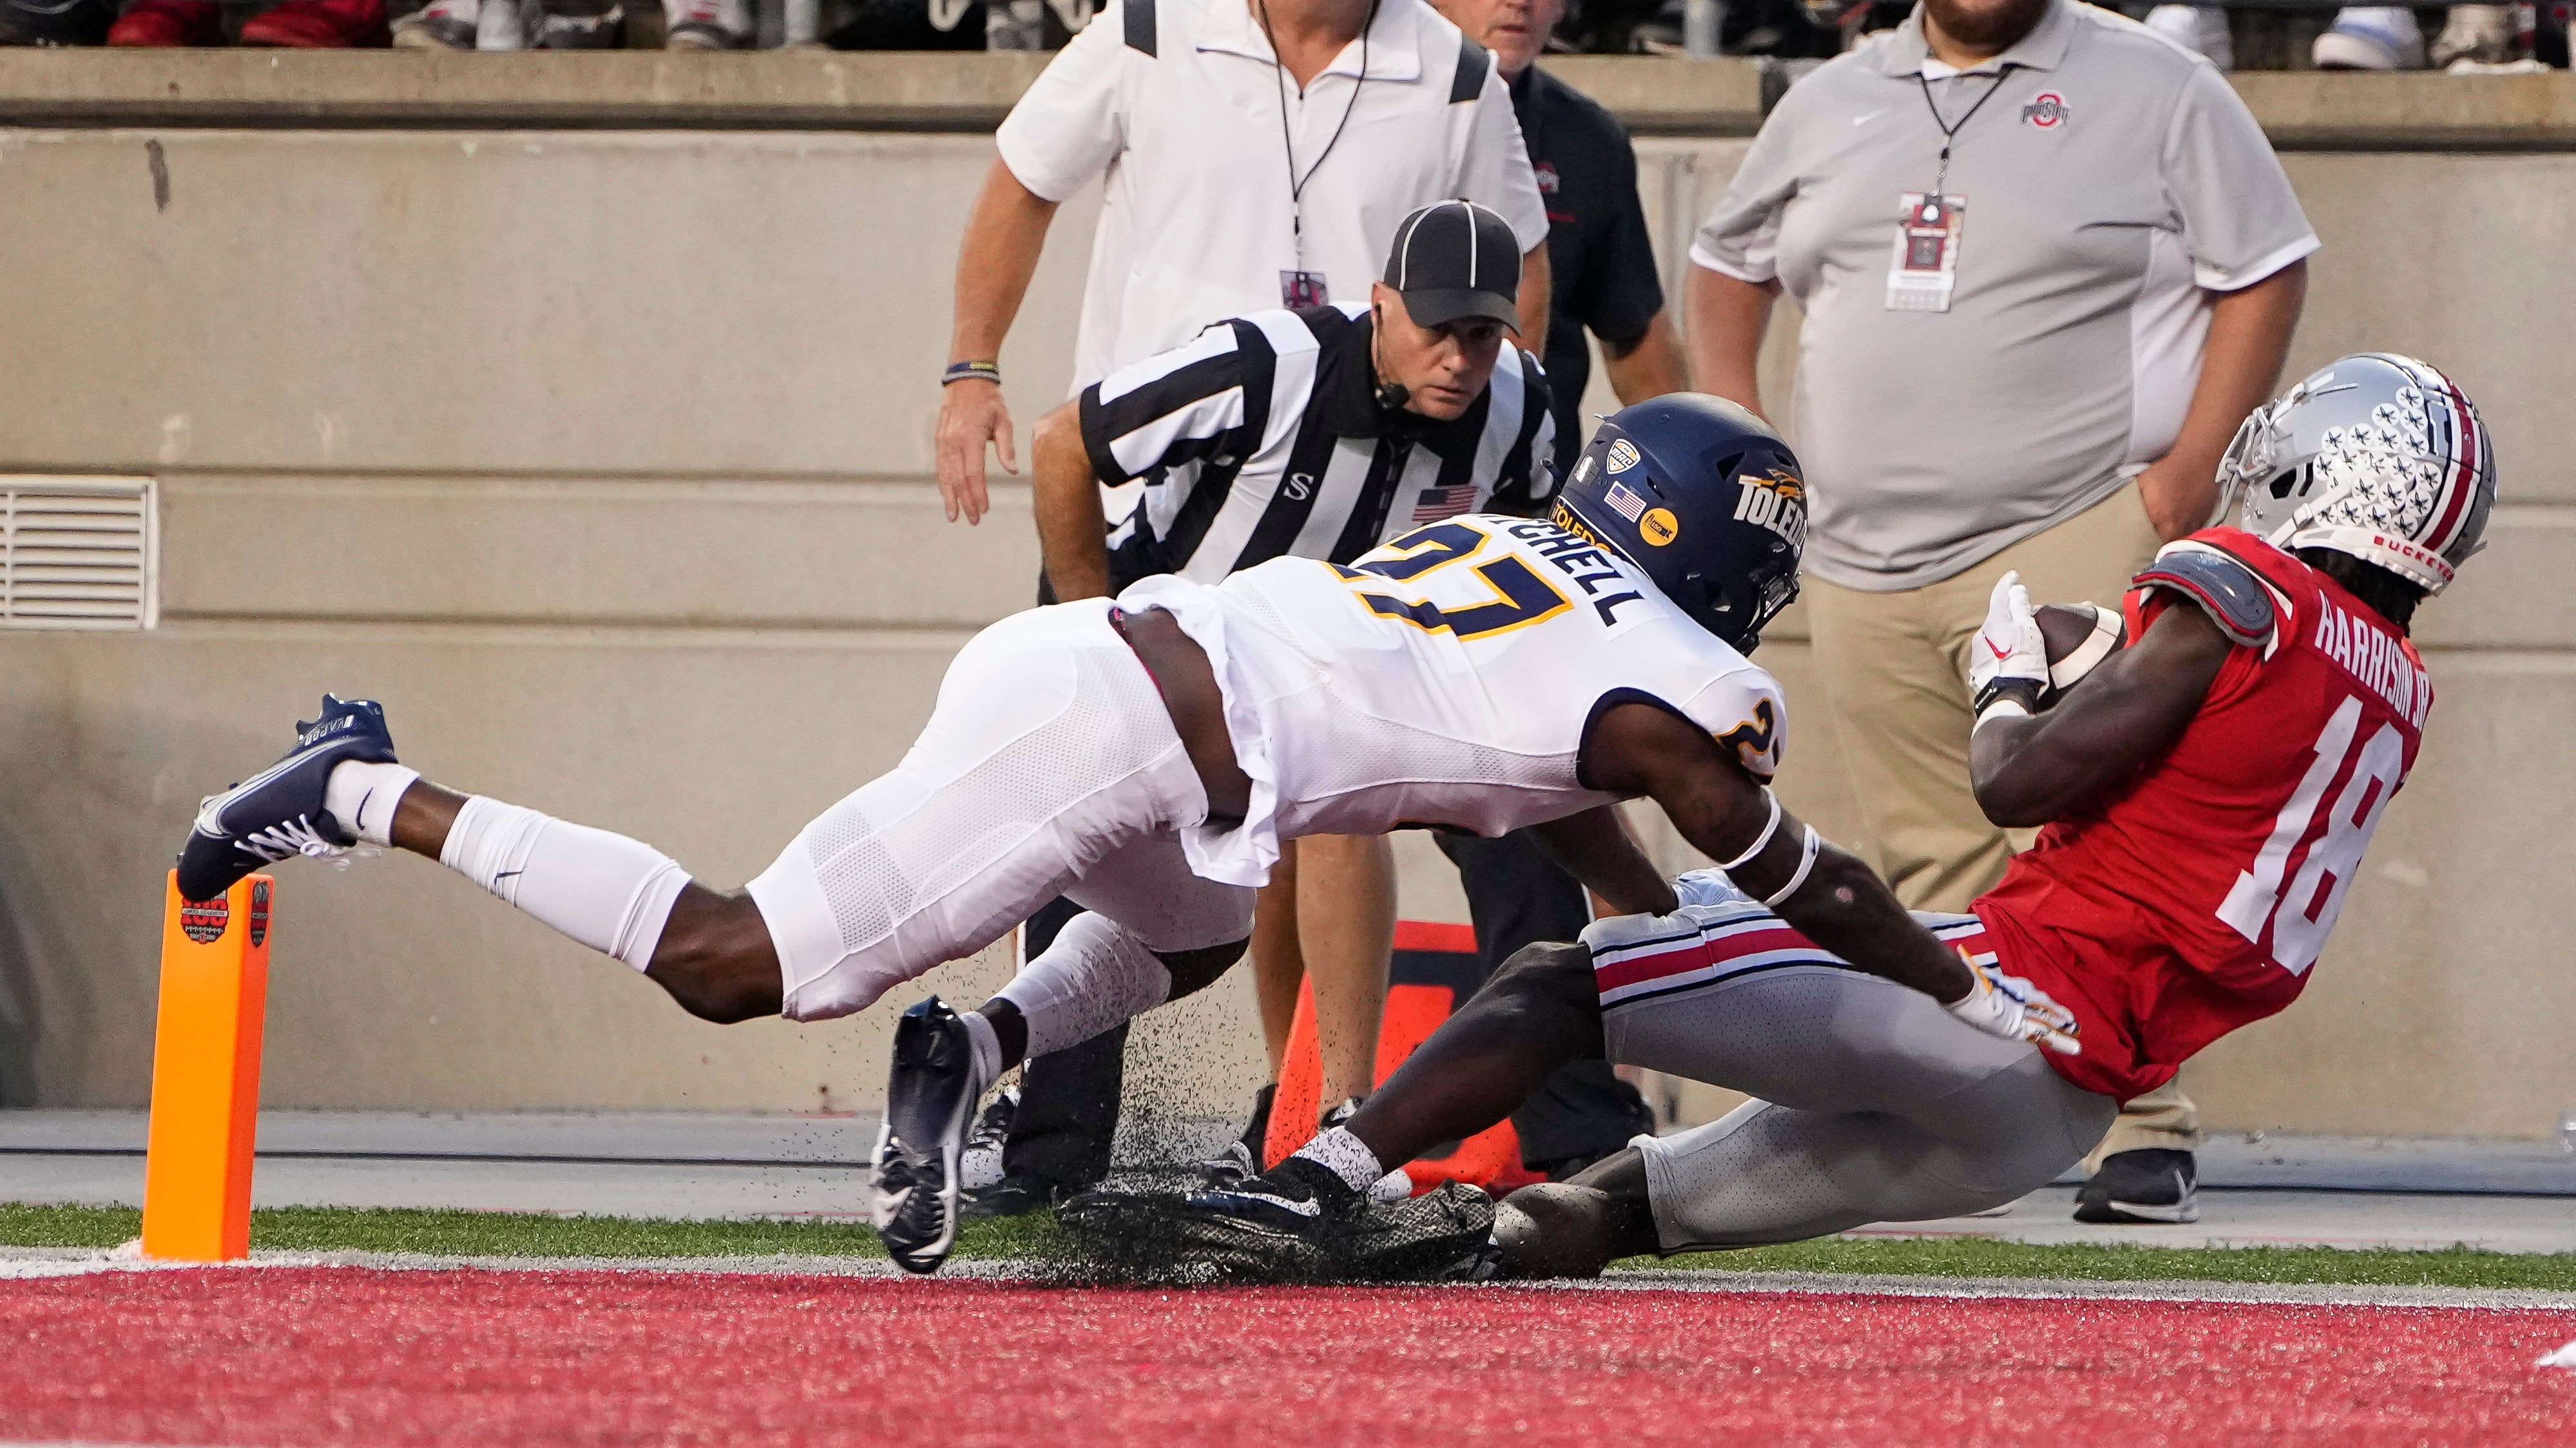 Ohio State Buckeyes wide receiver Marvin Harrison Jr. (18) is hit by Toledo's Quinyon Mitchell (27).